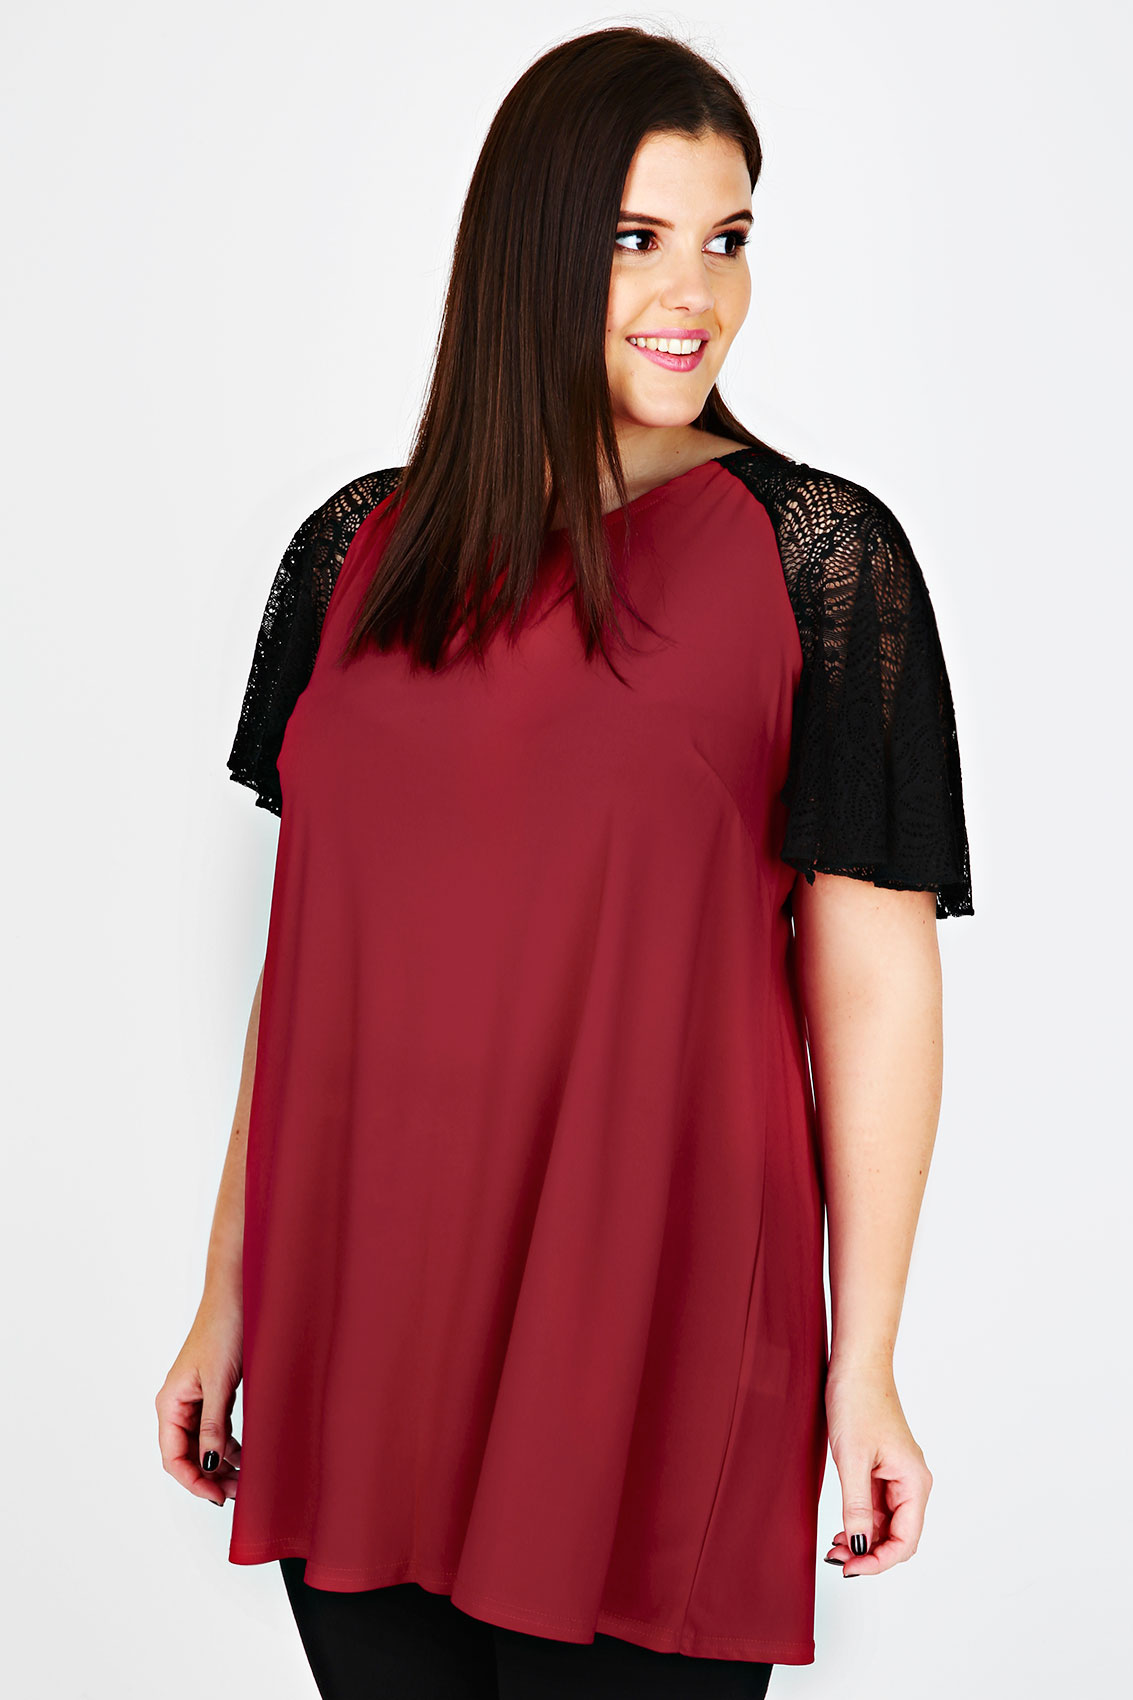 Red Longline Top With Black Lace Sleeves Plus Size 16 to 32